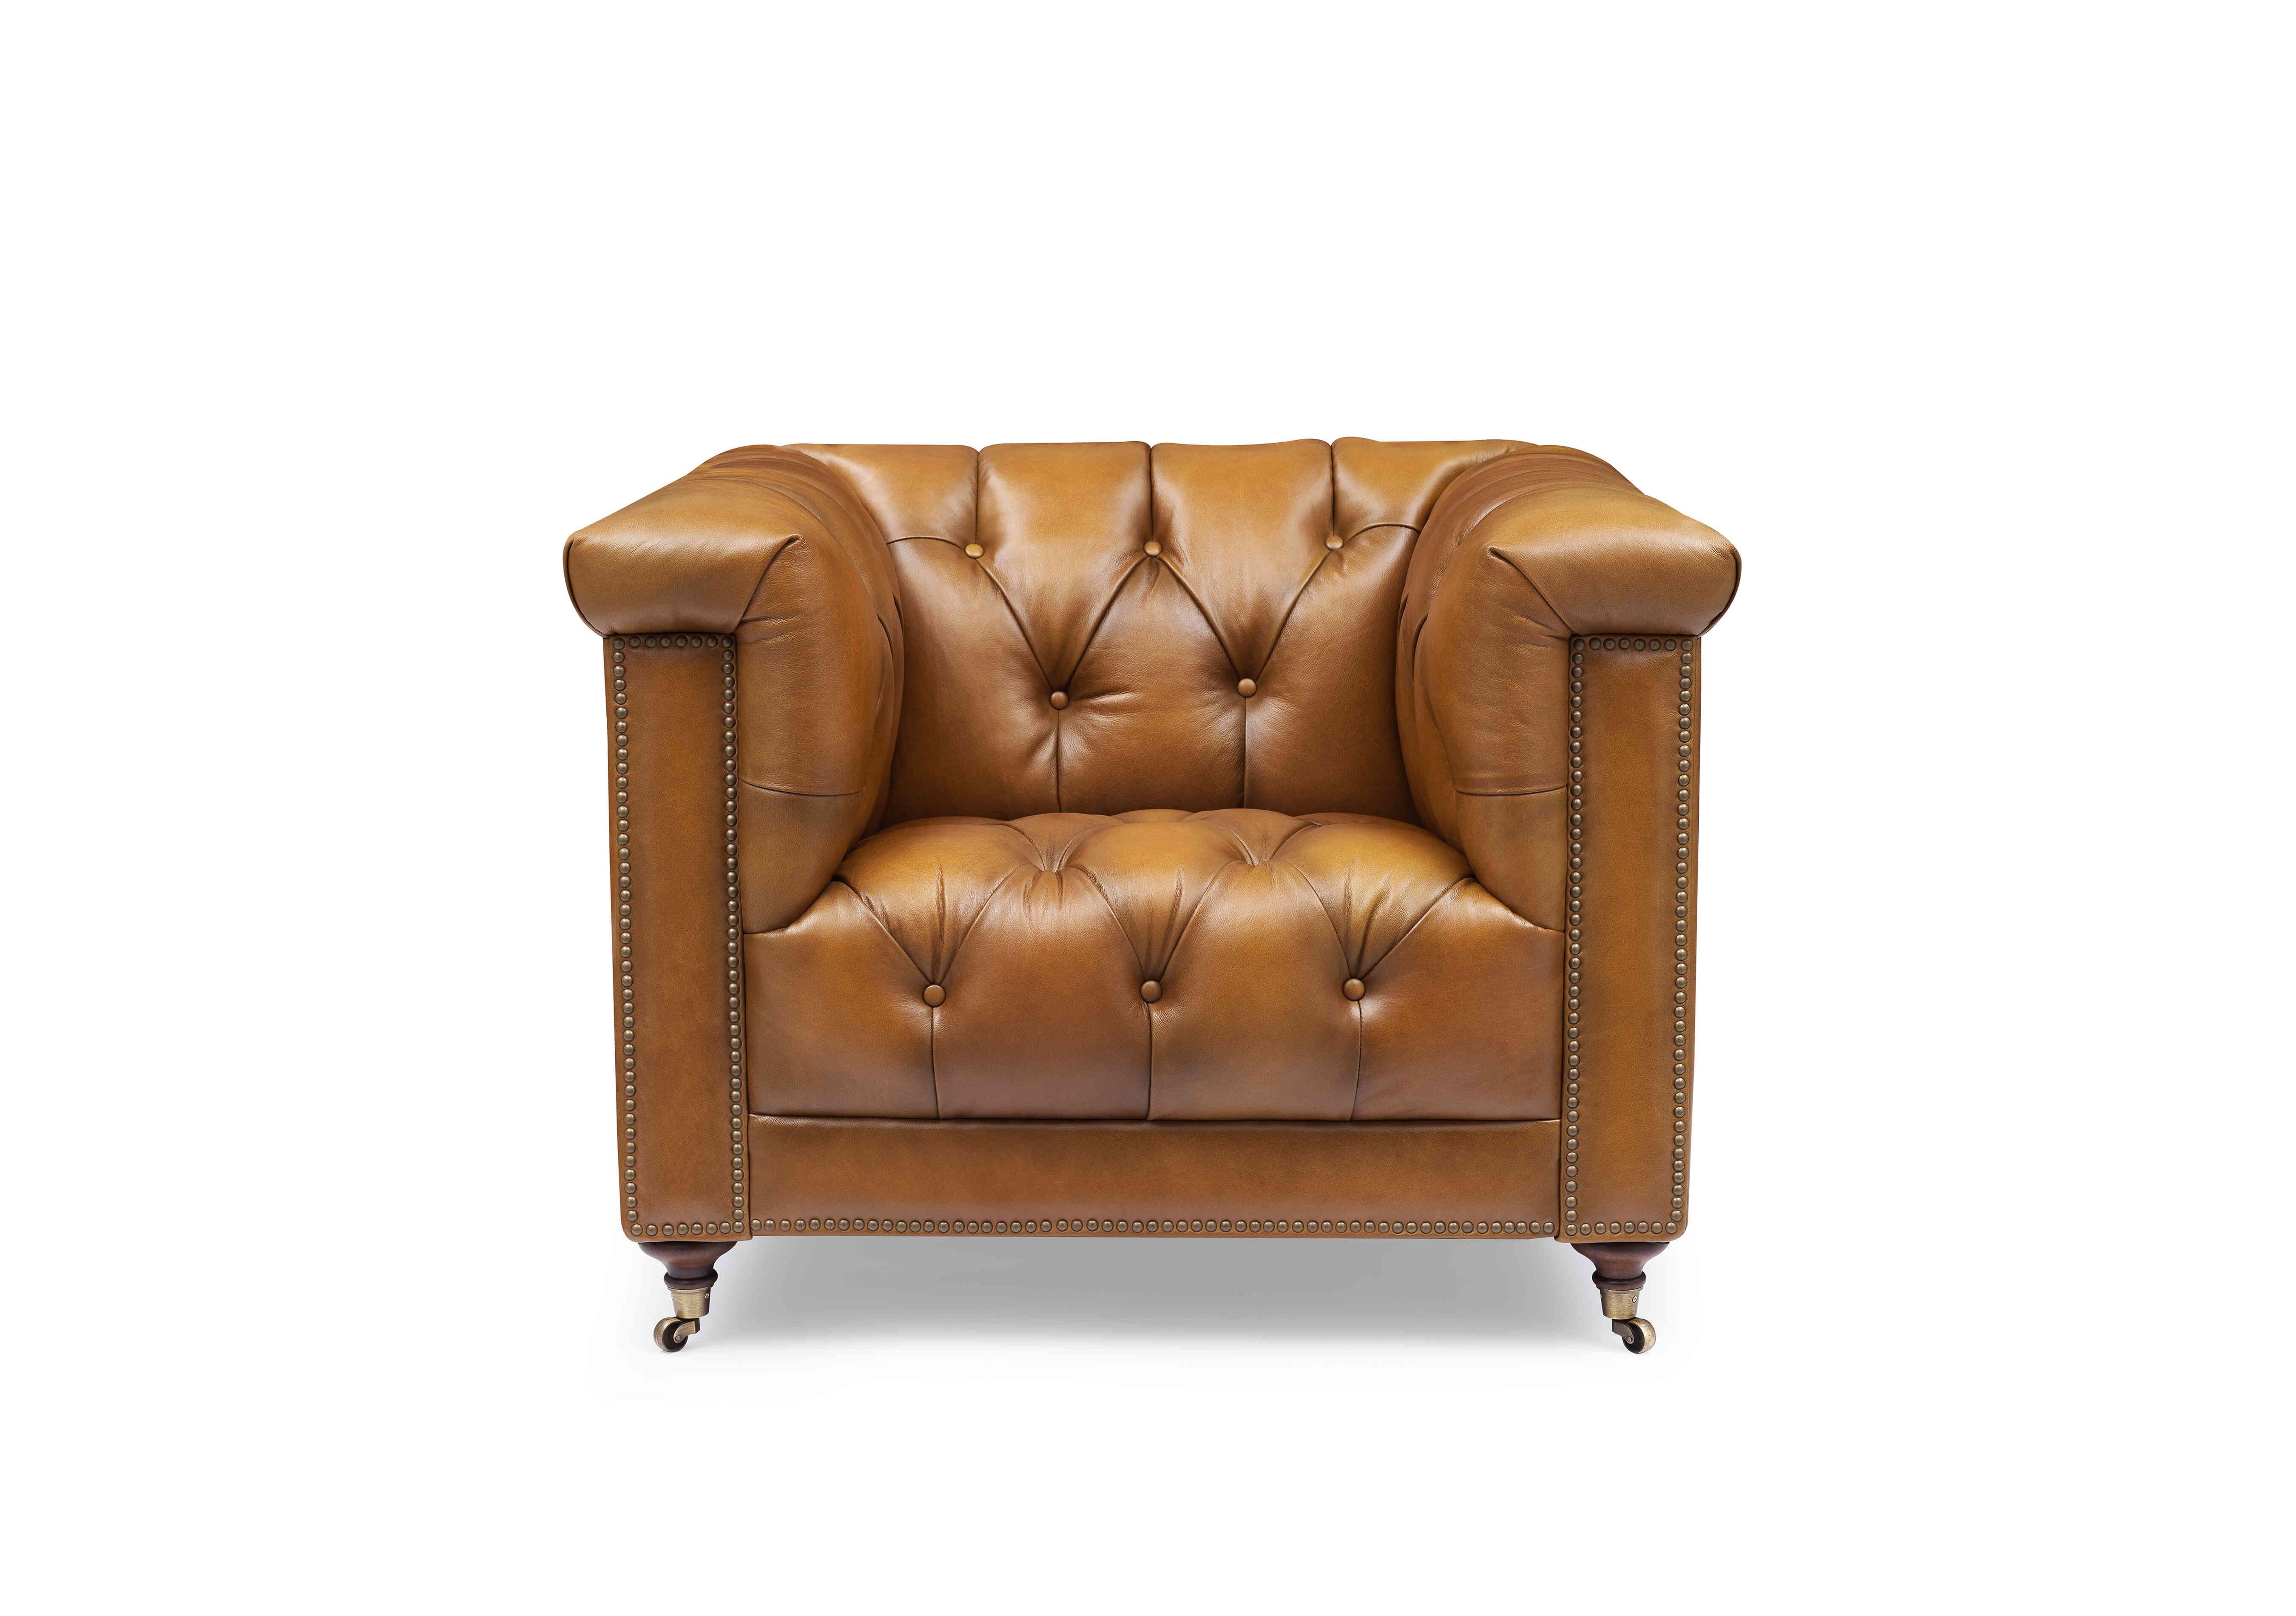 Wallace Leather Chesterfield Chair with USB-C in X3y1-1957ls Inca on Furniture Village